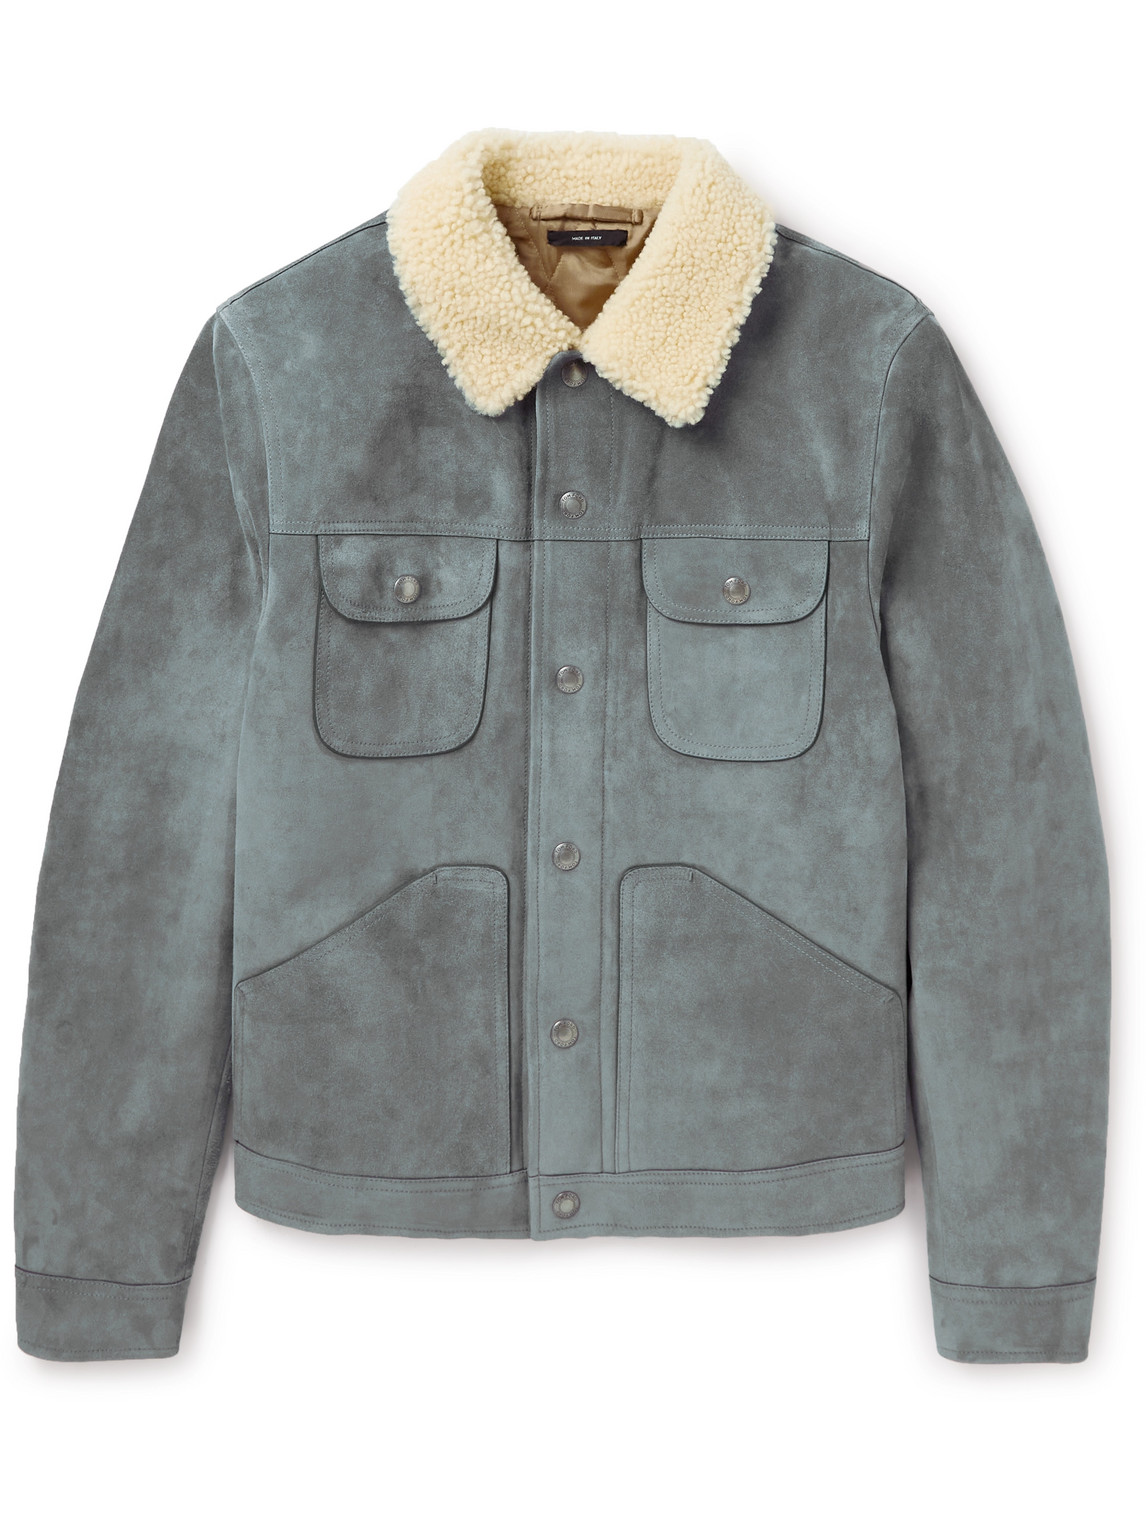 TOM FORD SHEARLING-TRIMMED SUEDE JACKET